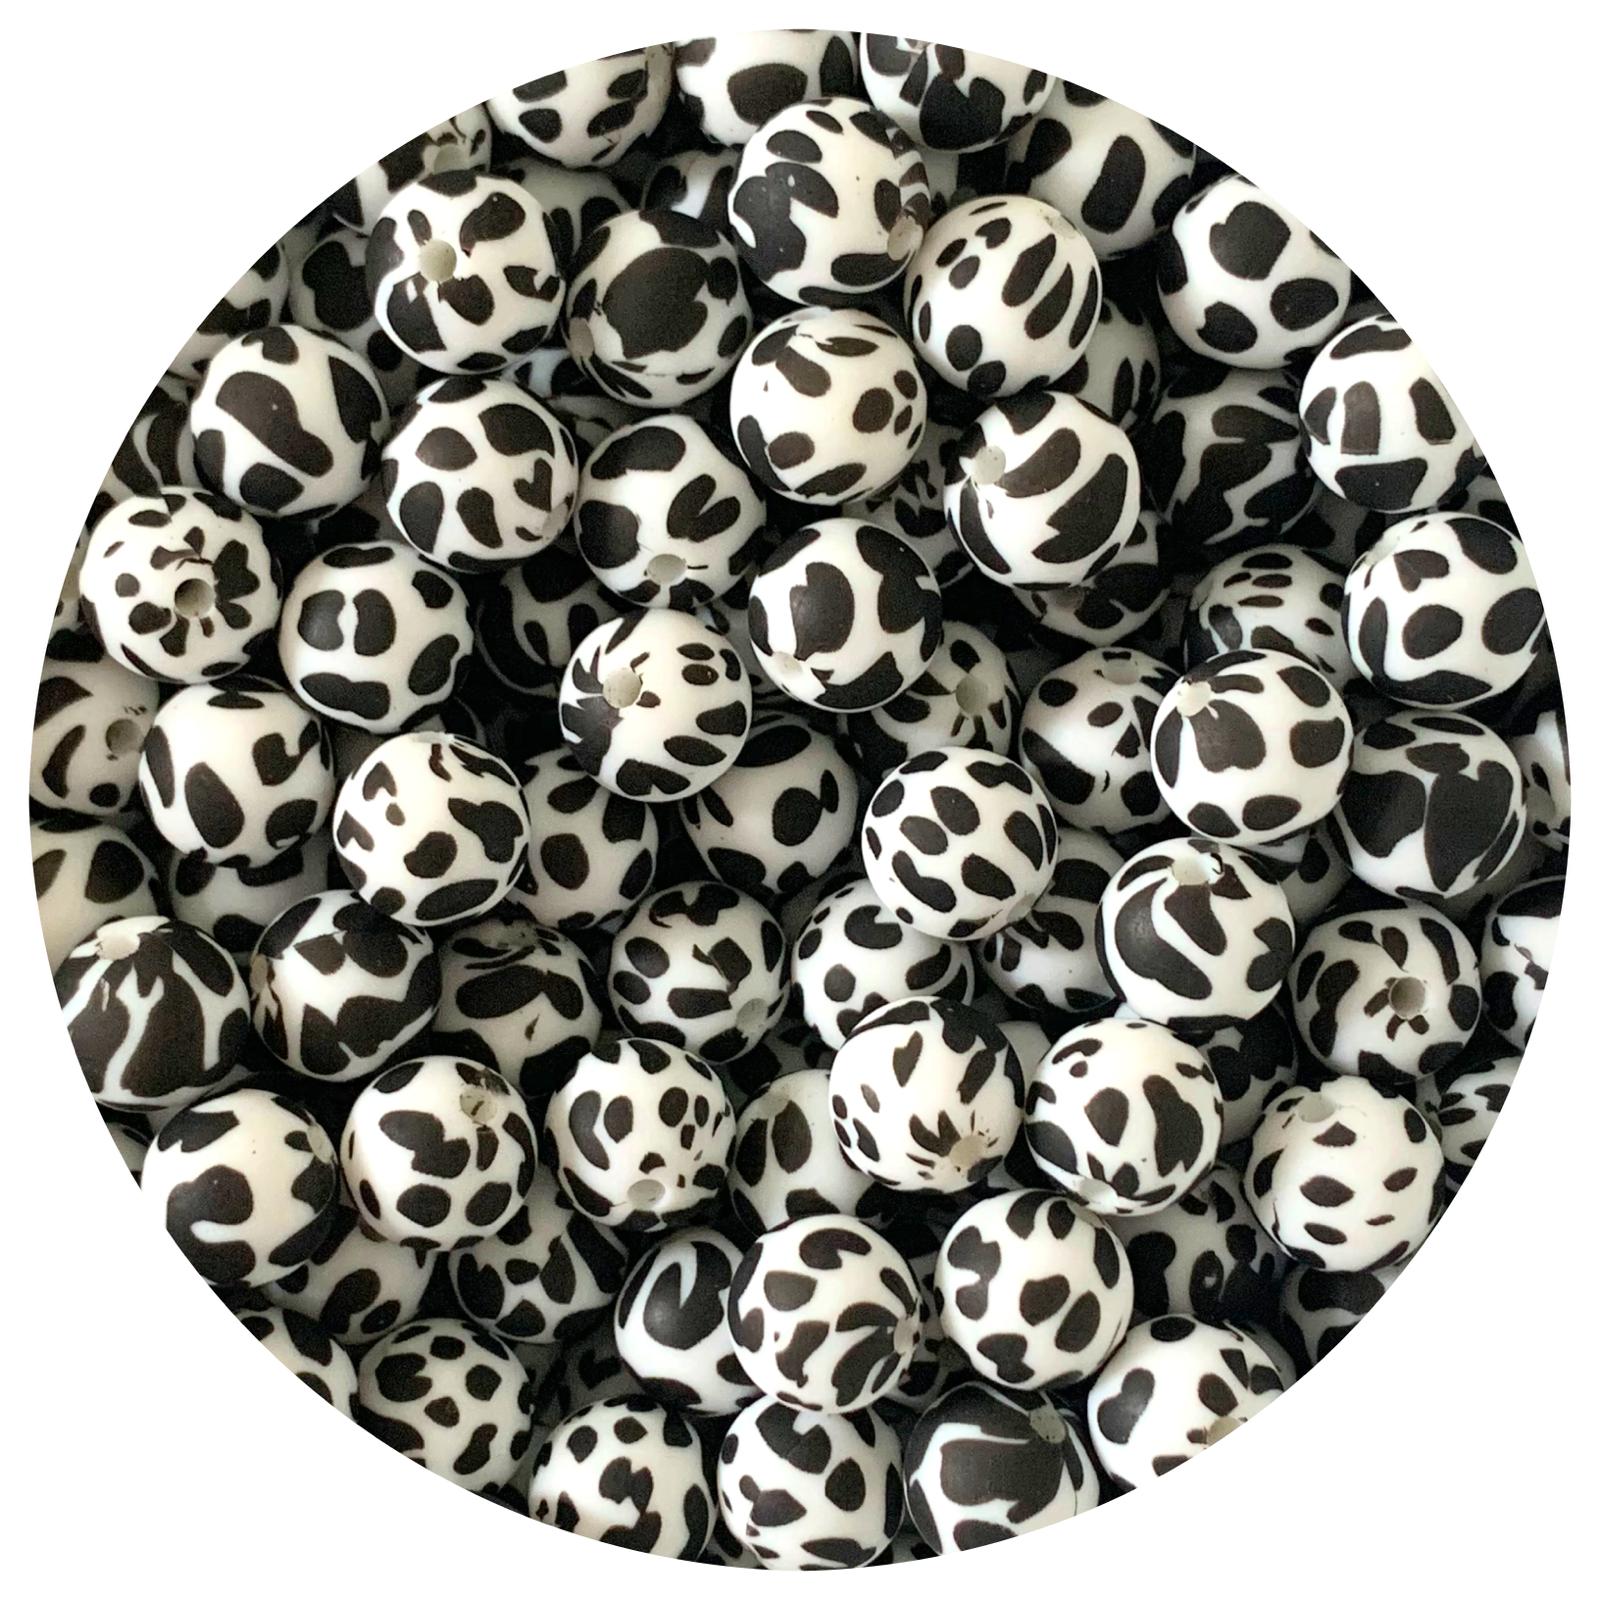 Cow Print - 12mm Round Silicone Beads - 10 beads